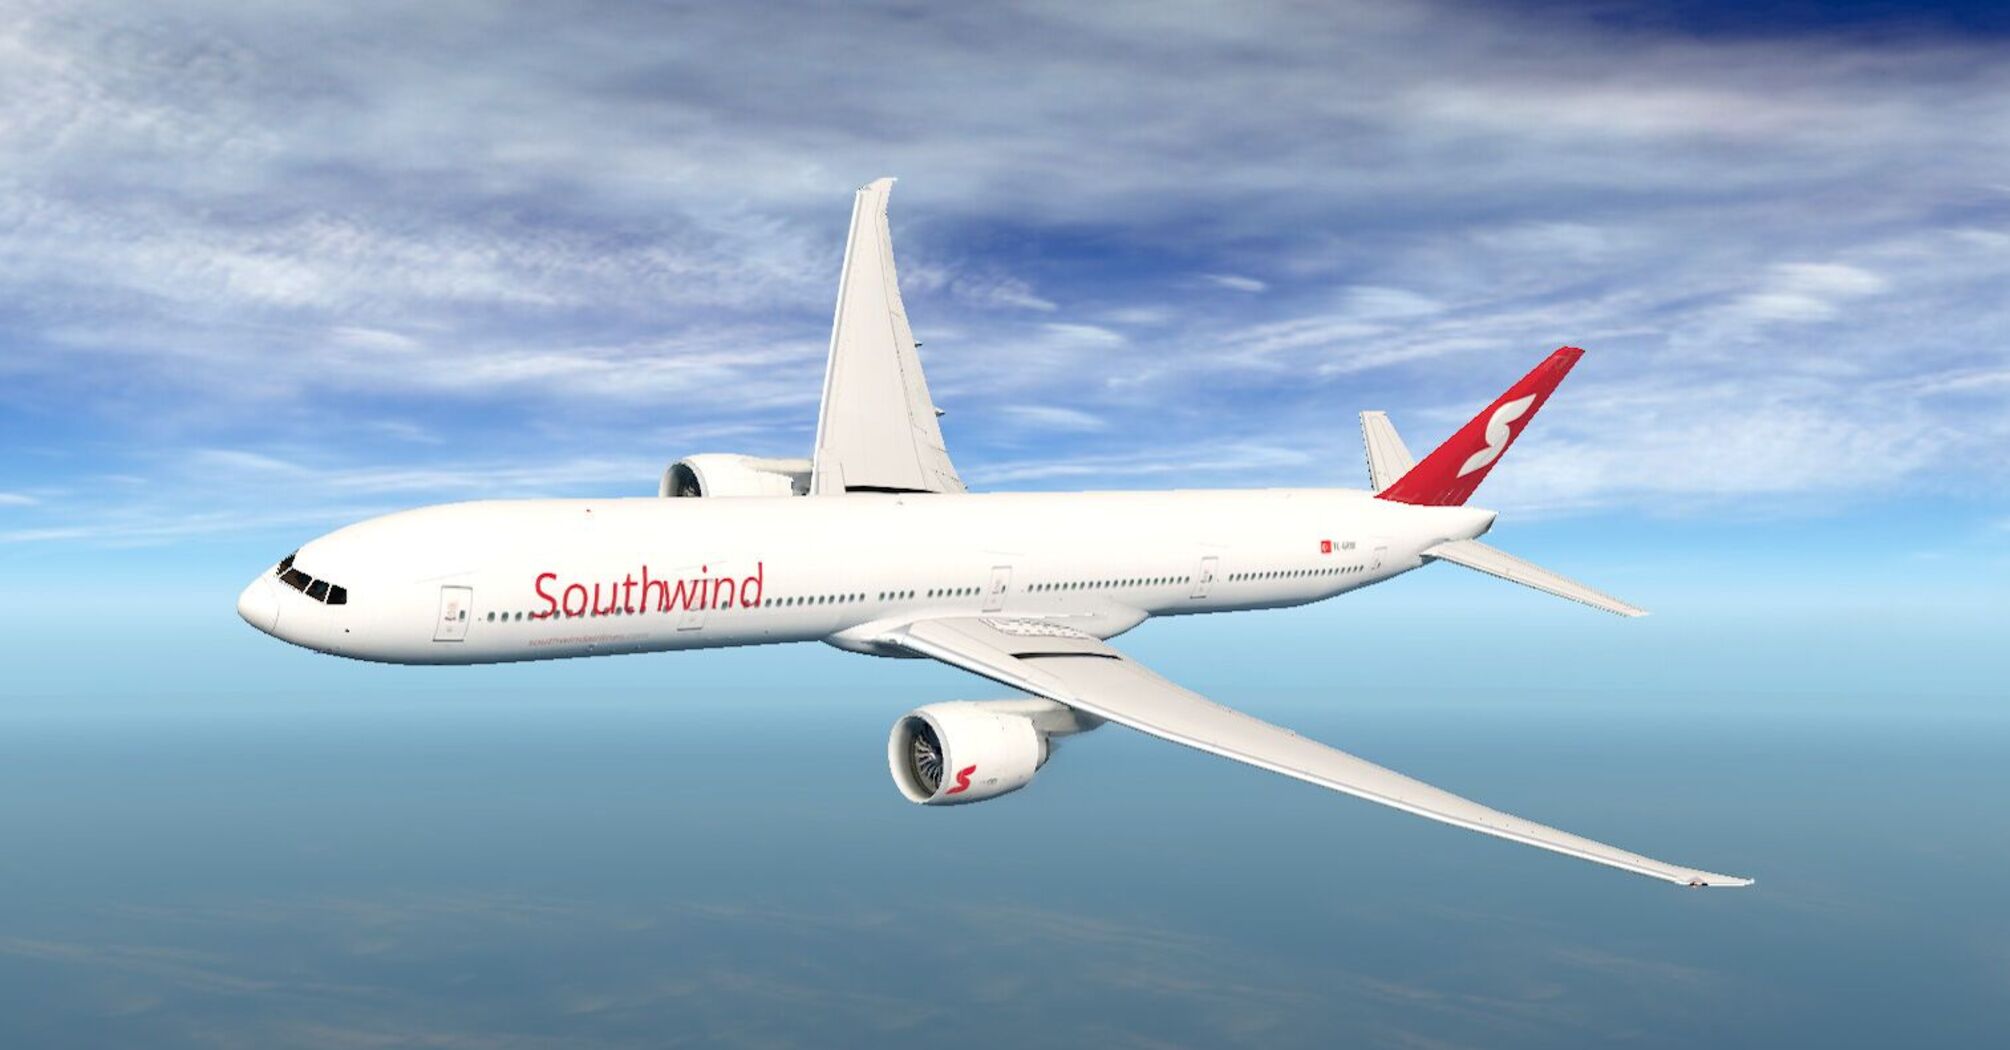 Antalya-based Southwind Airlines banned in Europe due to alleged links to Russia